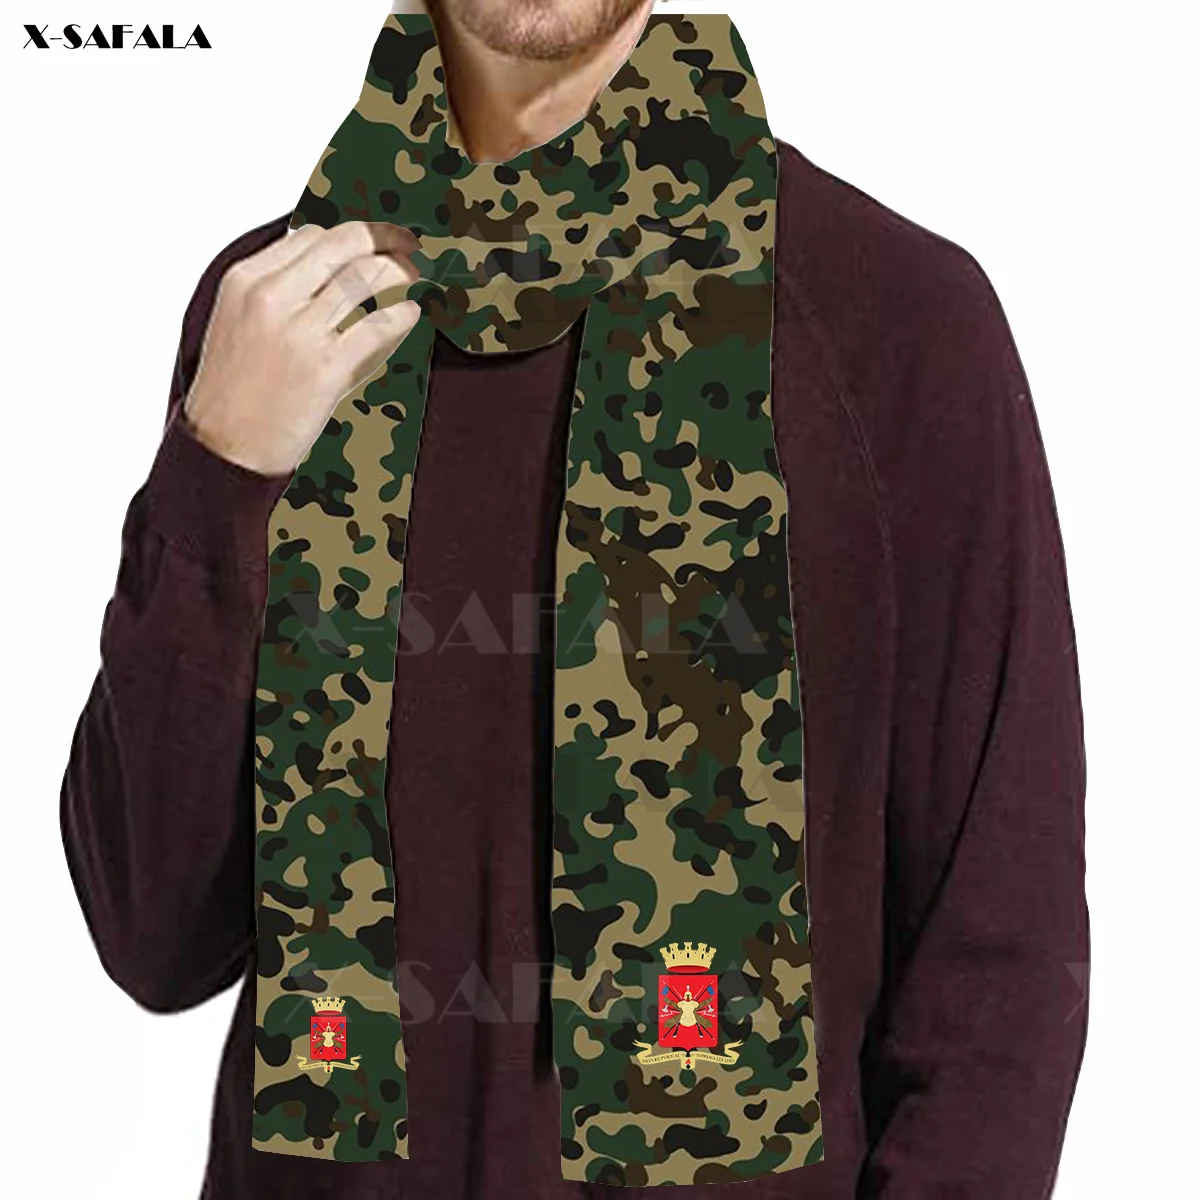 French Army Camouflage  3D Printed Scarf Long Scarves Shawl Muffler Men's Gift 100% Pure Cashmere Feel Super Soft paul smith scarves